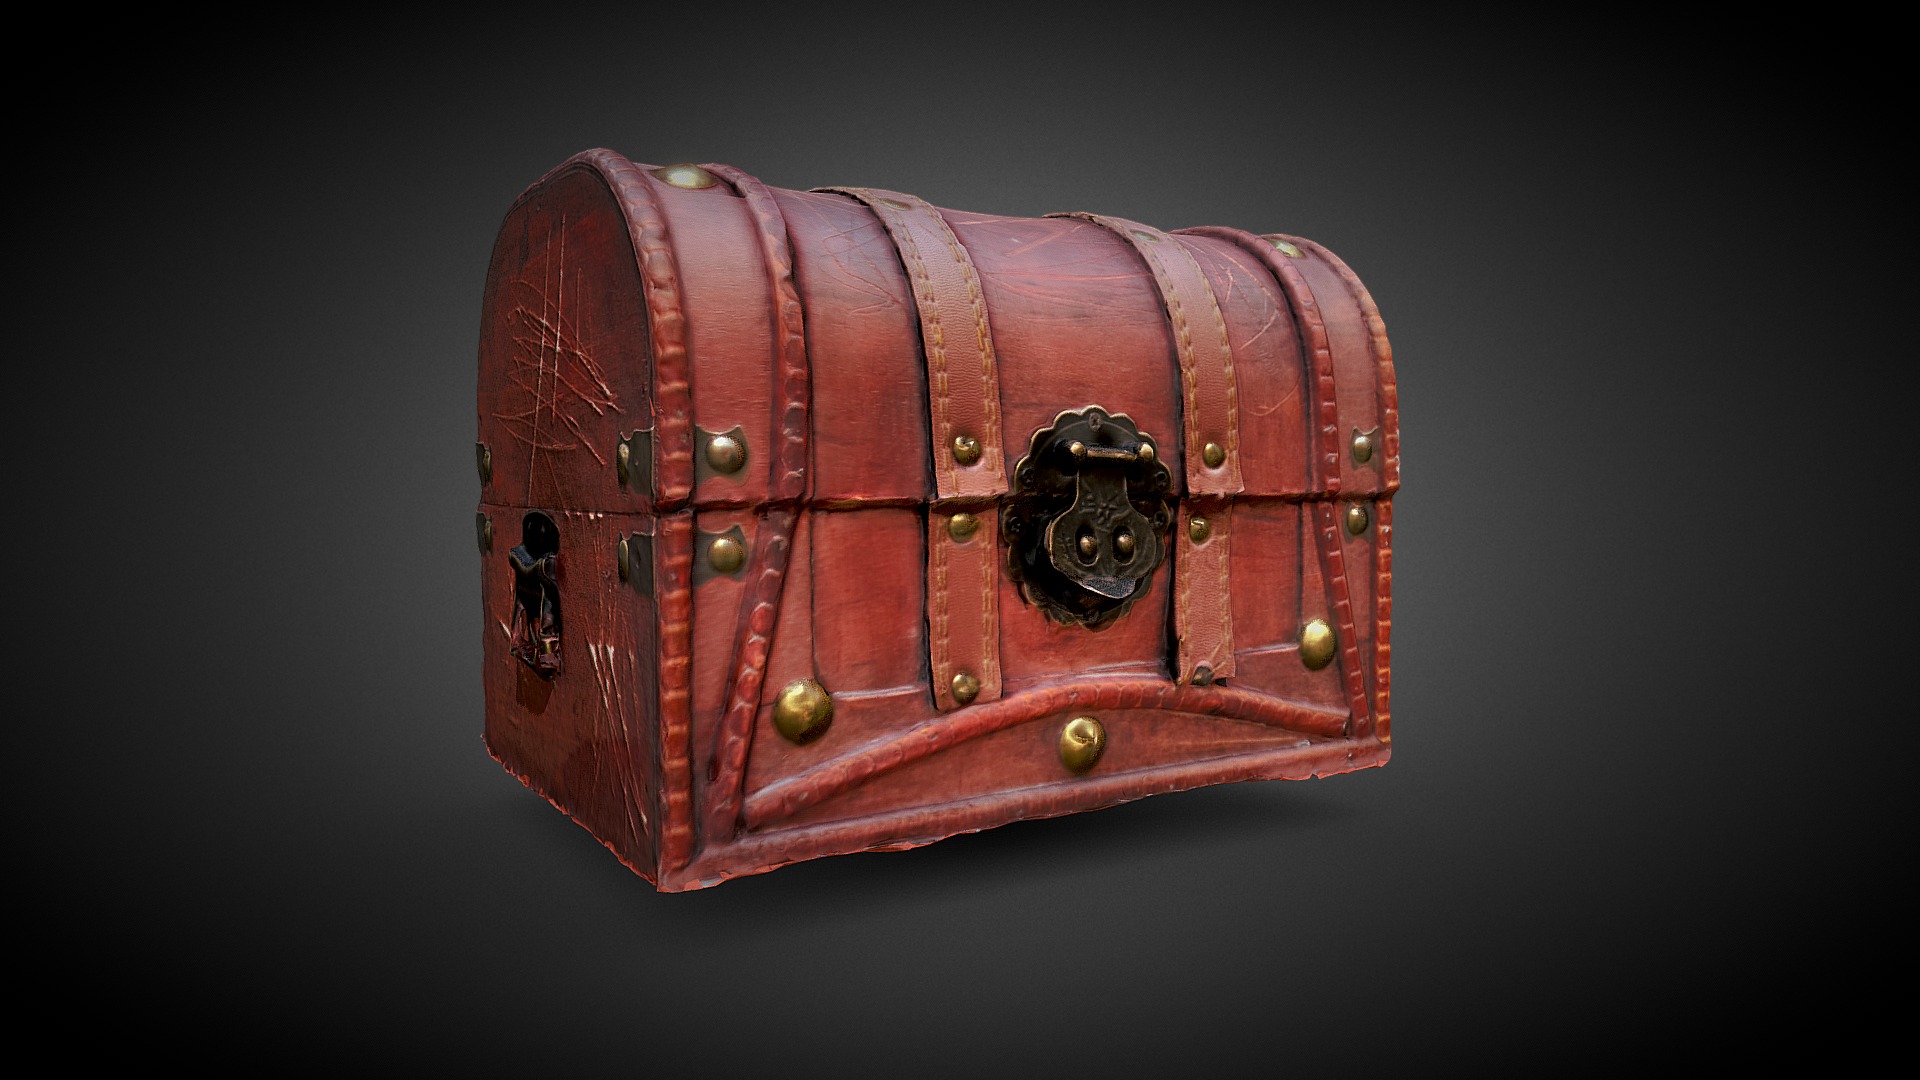 DSLR scan of an old wooden chest with metal and leather parts.
Shot with sony a300

Low Poly model with 4K textures - Wooden Chest - Buy Royalty Free 3D model by 3DSCANFR (sdrn) (@3DSCANFR) 3d model